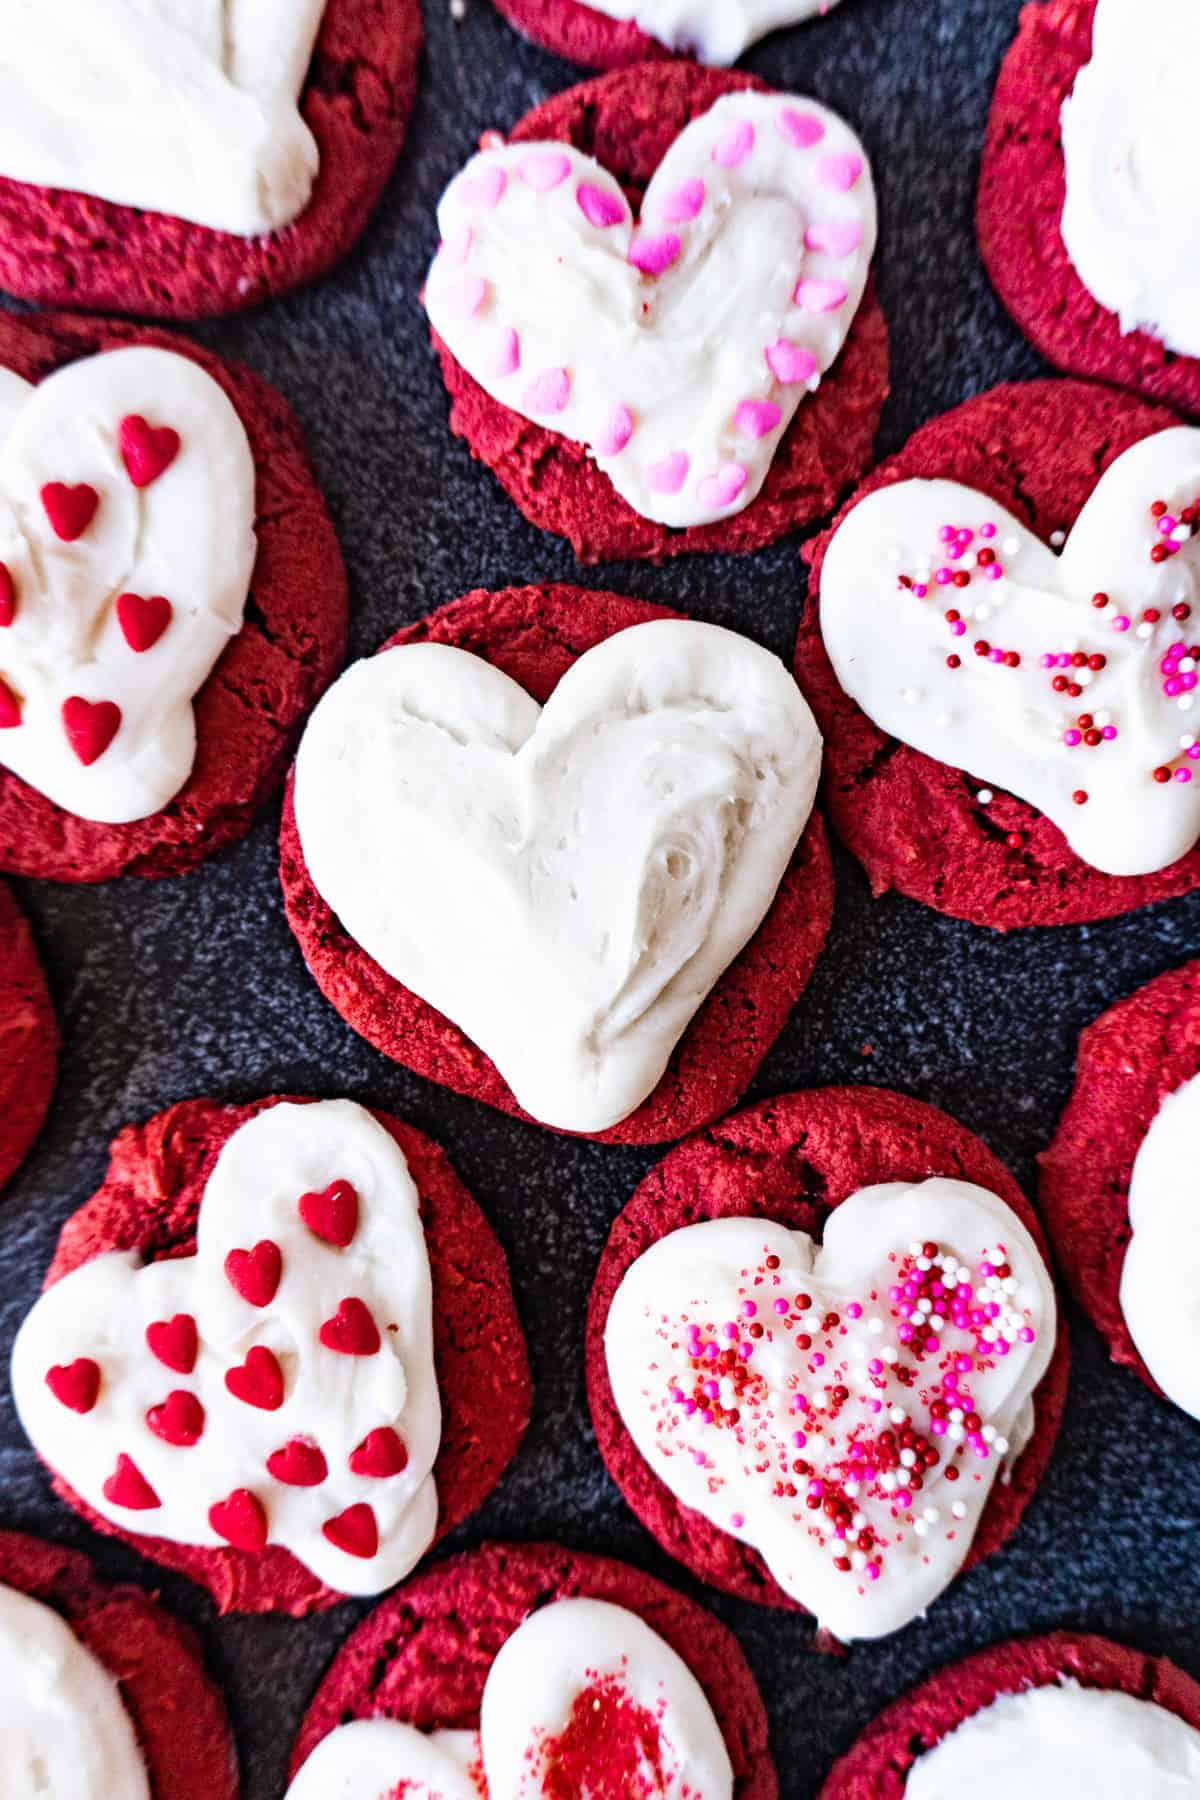 red velvet cookies with hearts piped on